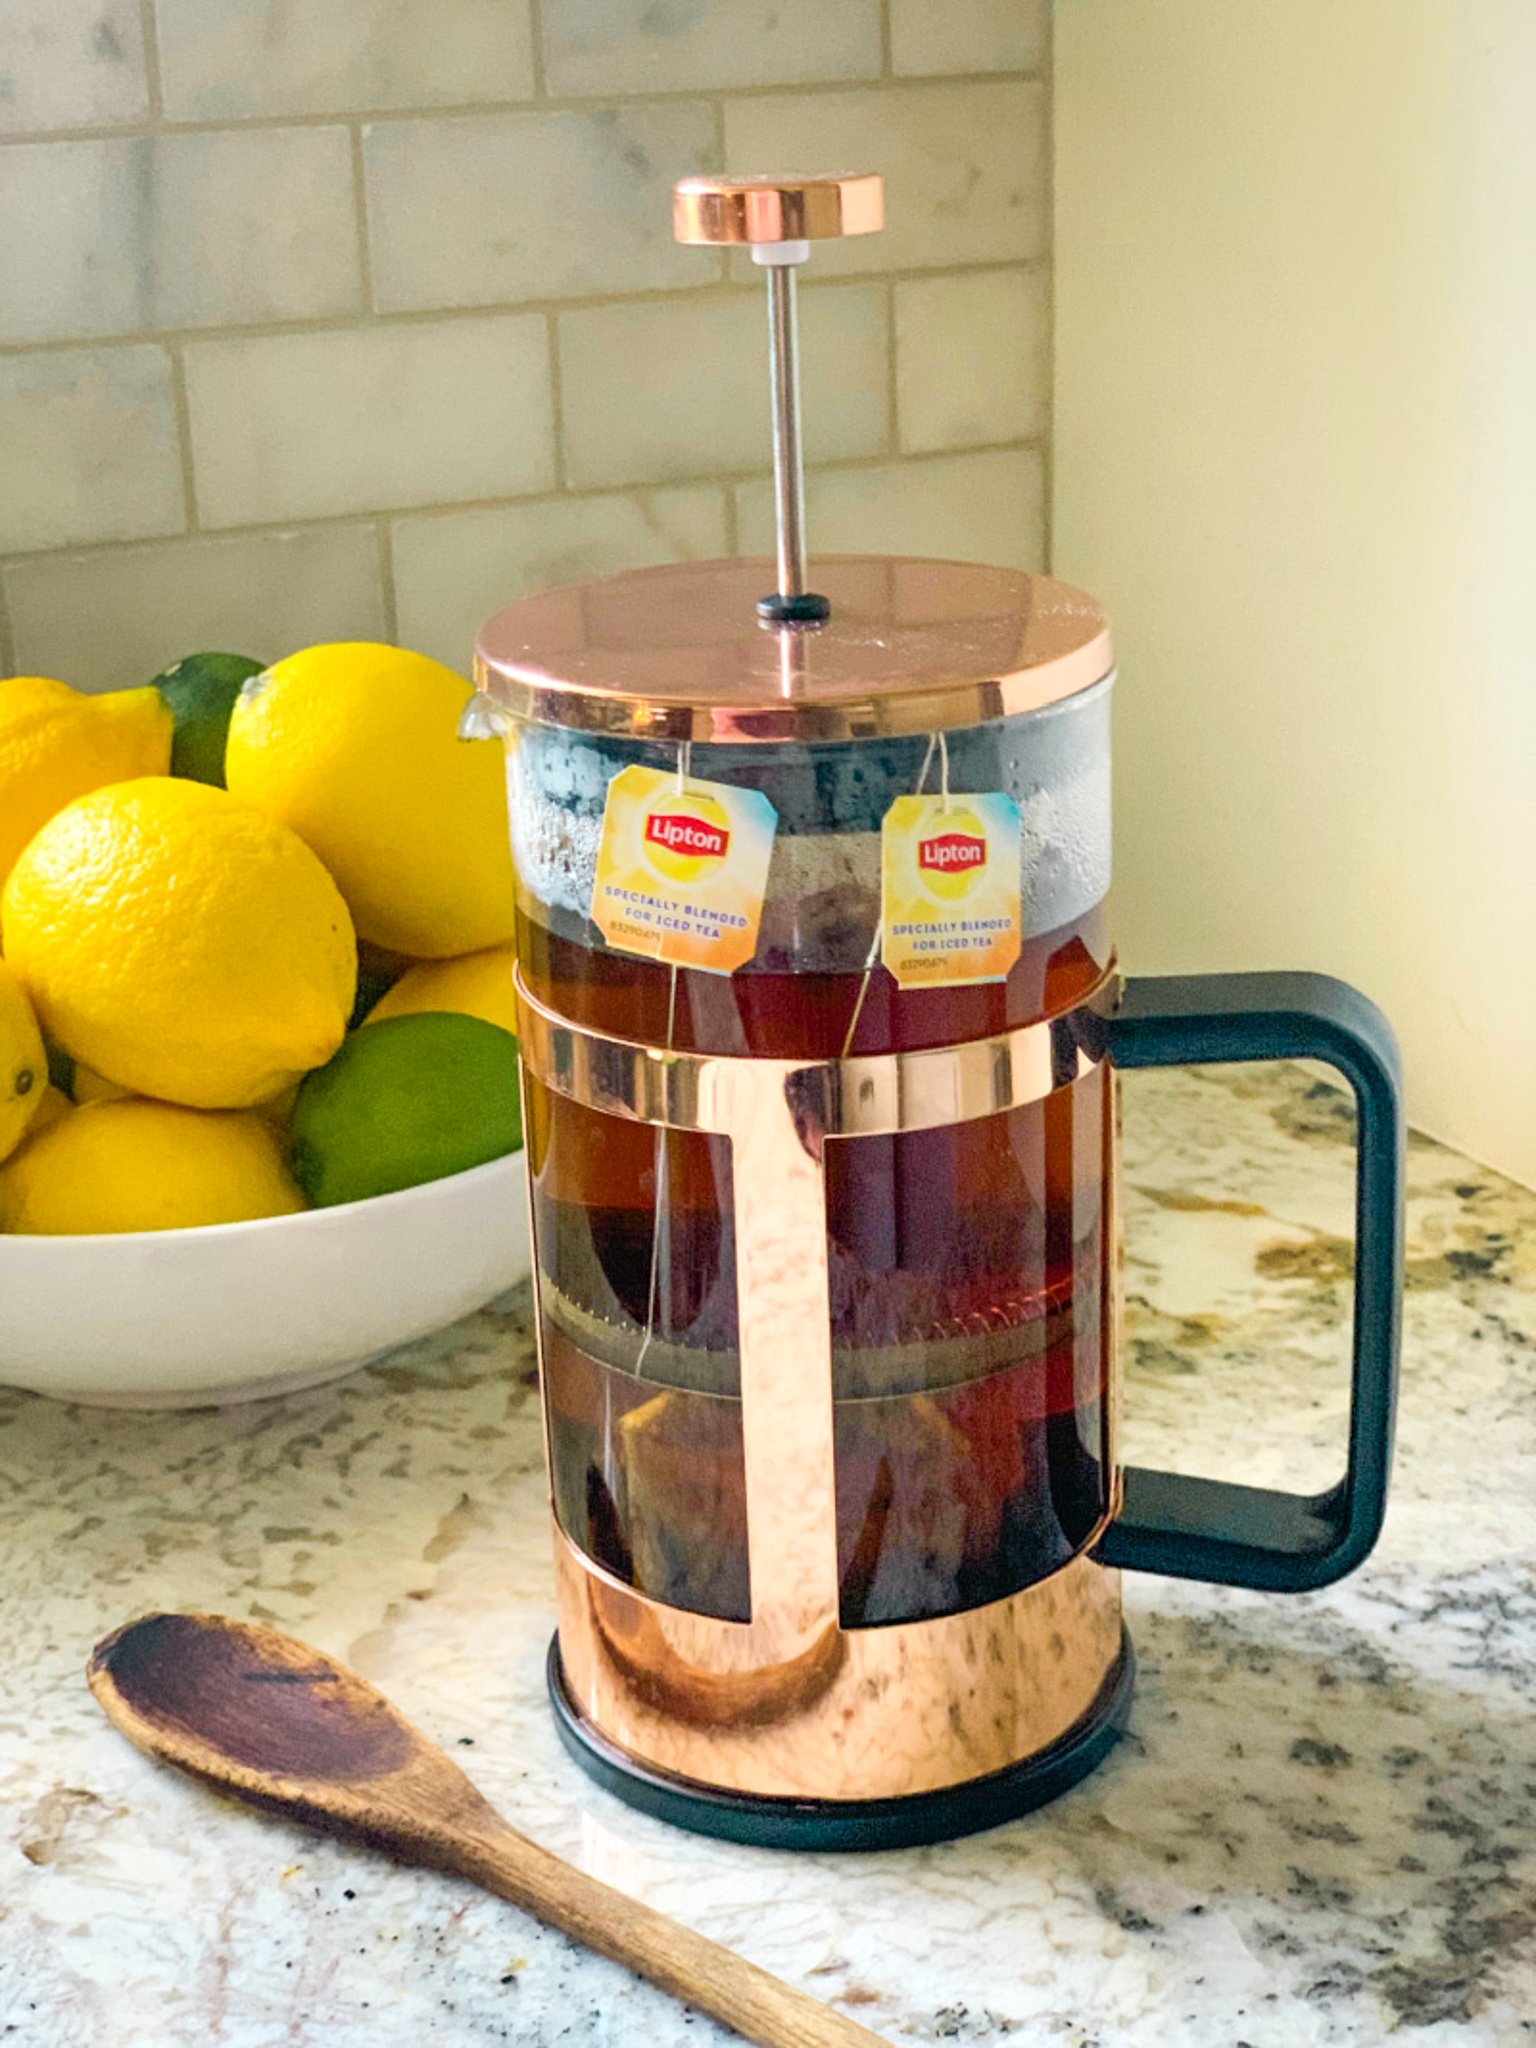 Does anyone else use a French press for tea? : r/tea